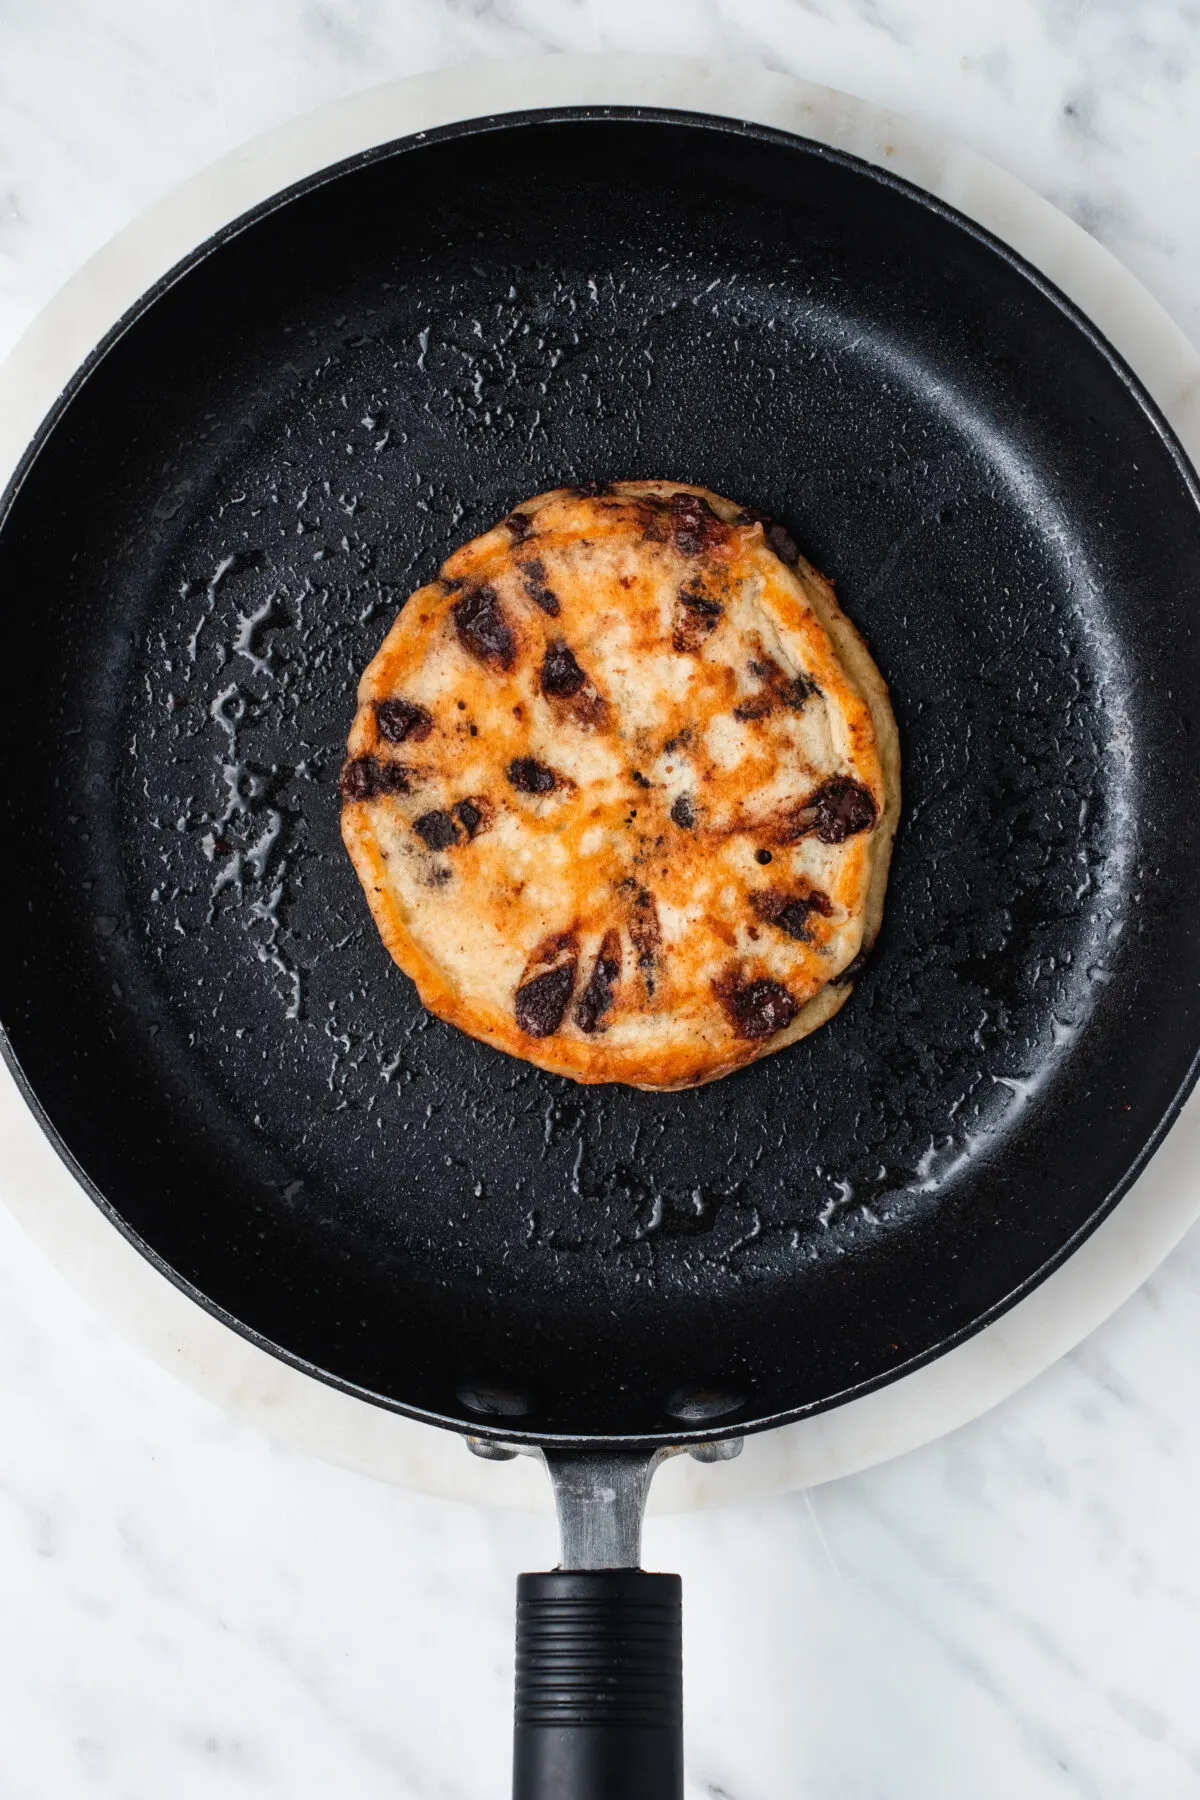 Cooked pancake in a greased pan.